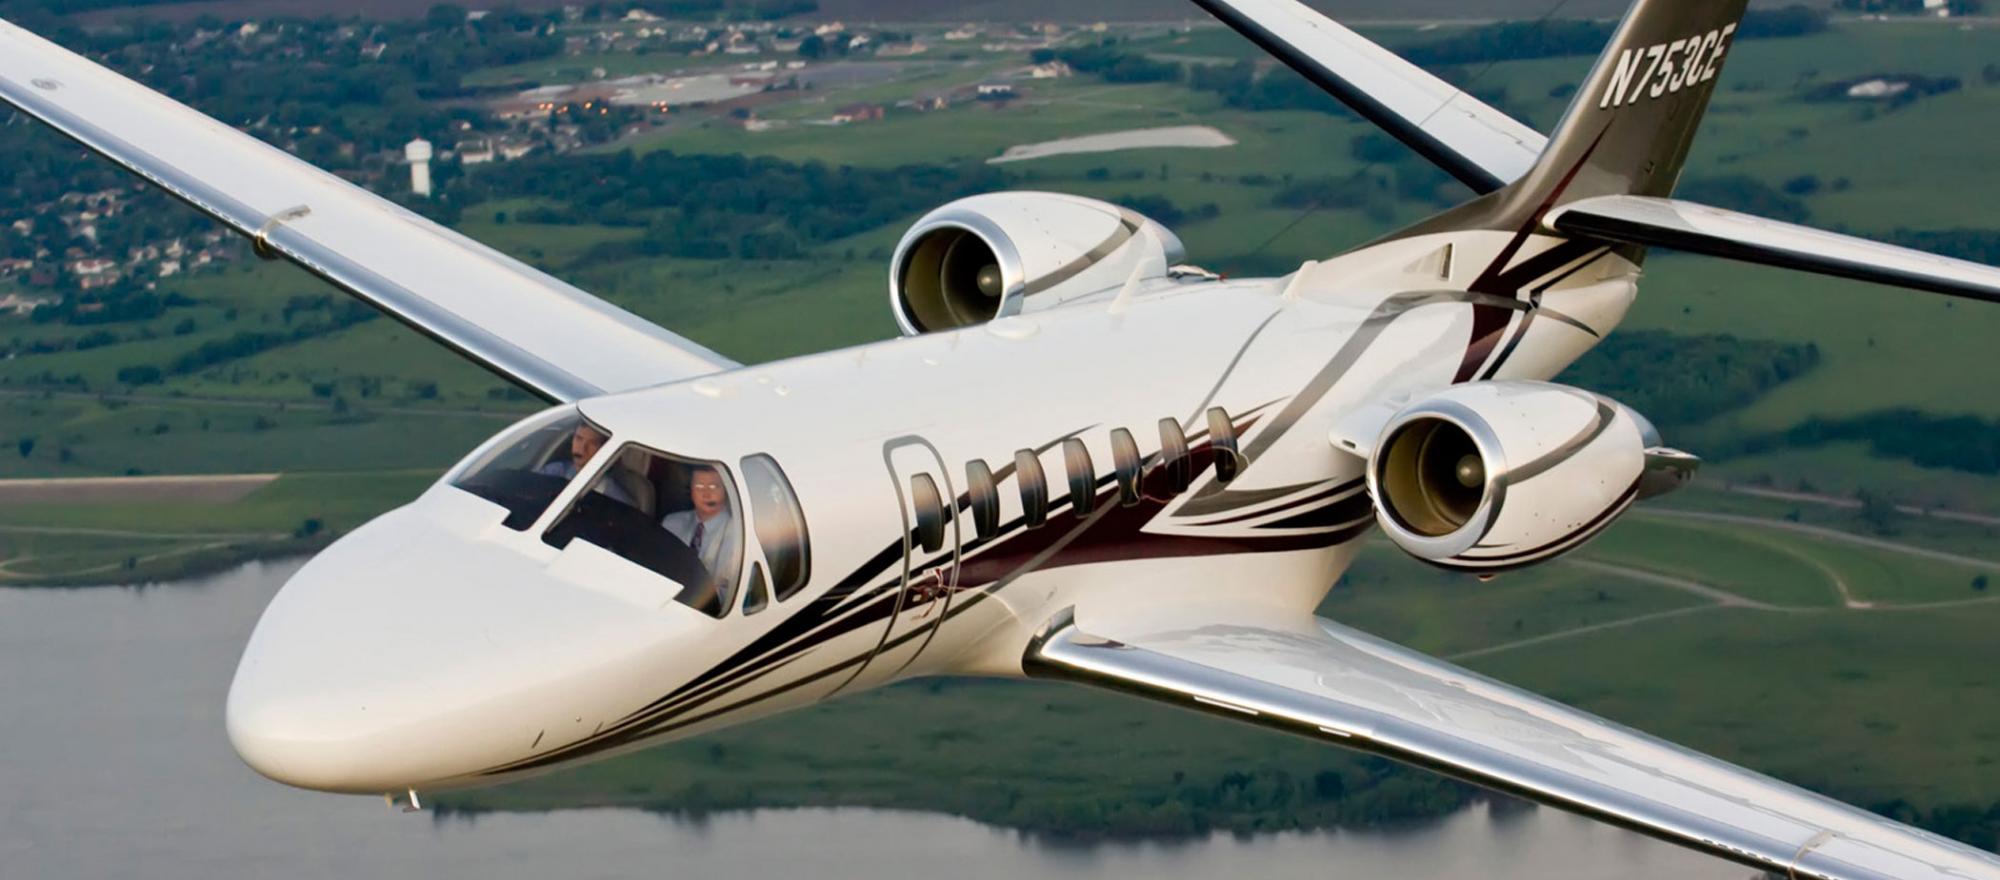 When Embraer sold NetJets a new fleet of Phenom light jets, it took 25 of these Citation Ultras in exchange.